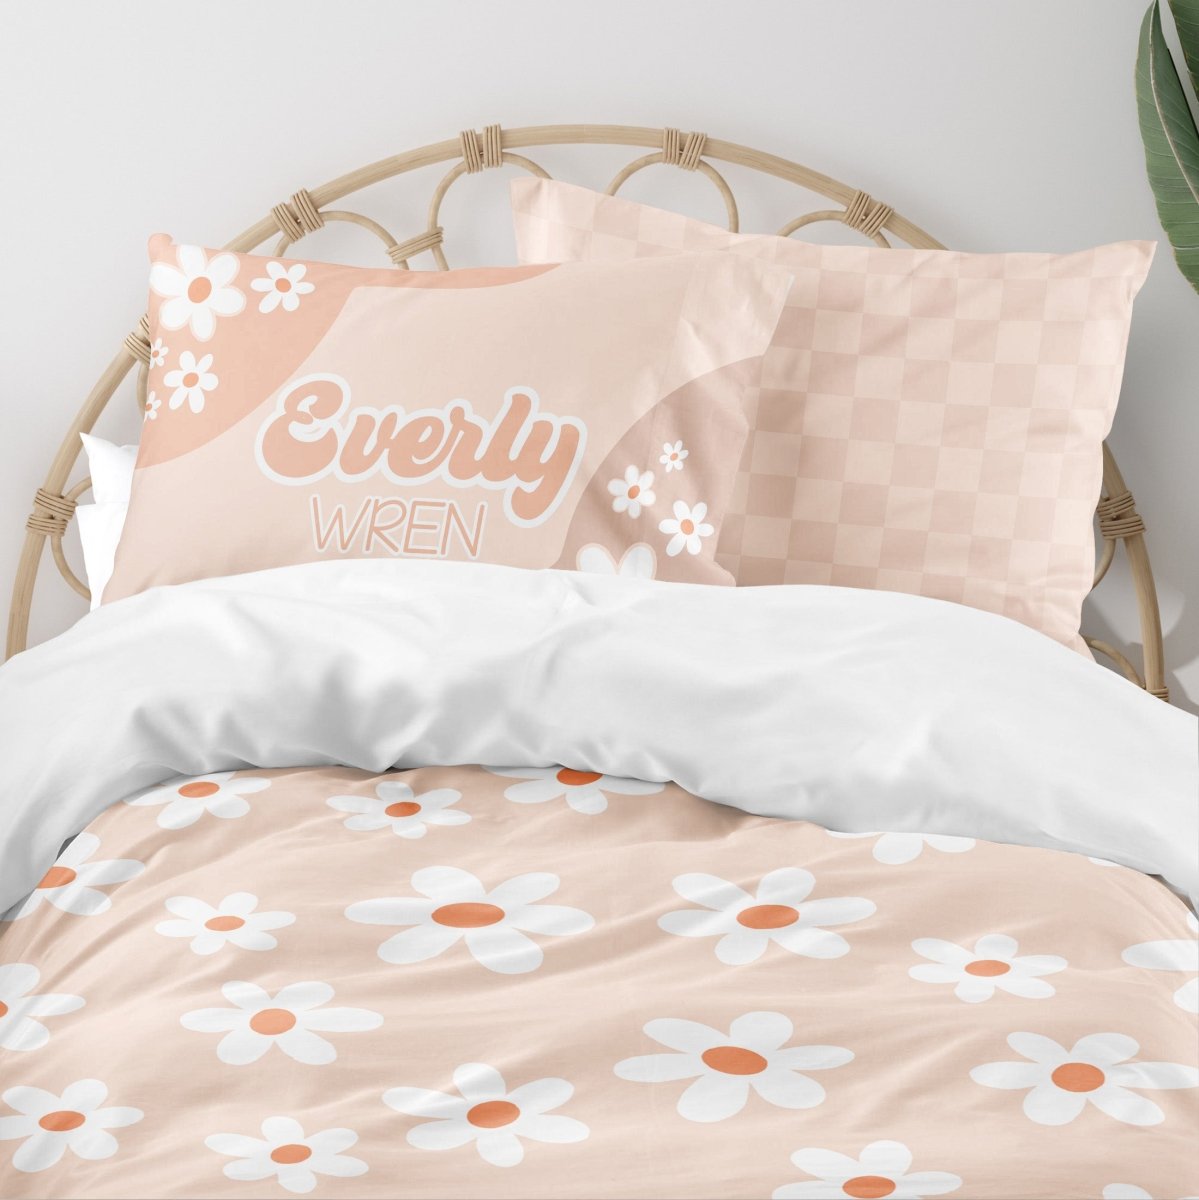 Daisy Personalized Kids Bedding Set (Comforter or Duvet Cover) - Daisy, gender_girl, text